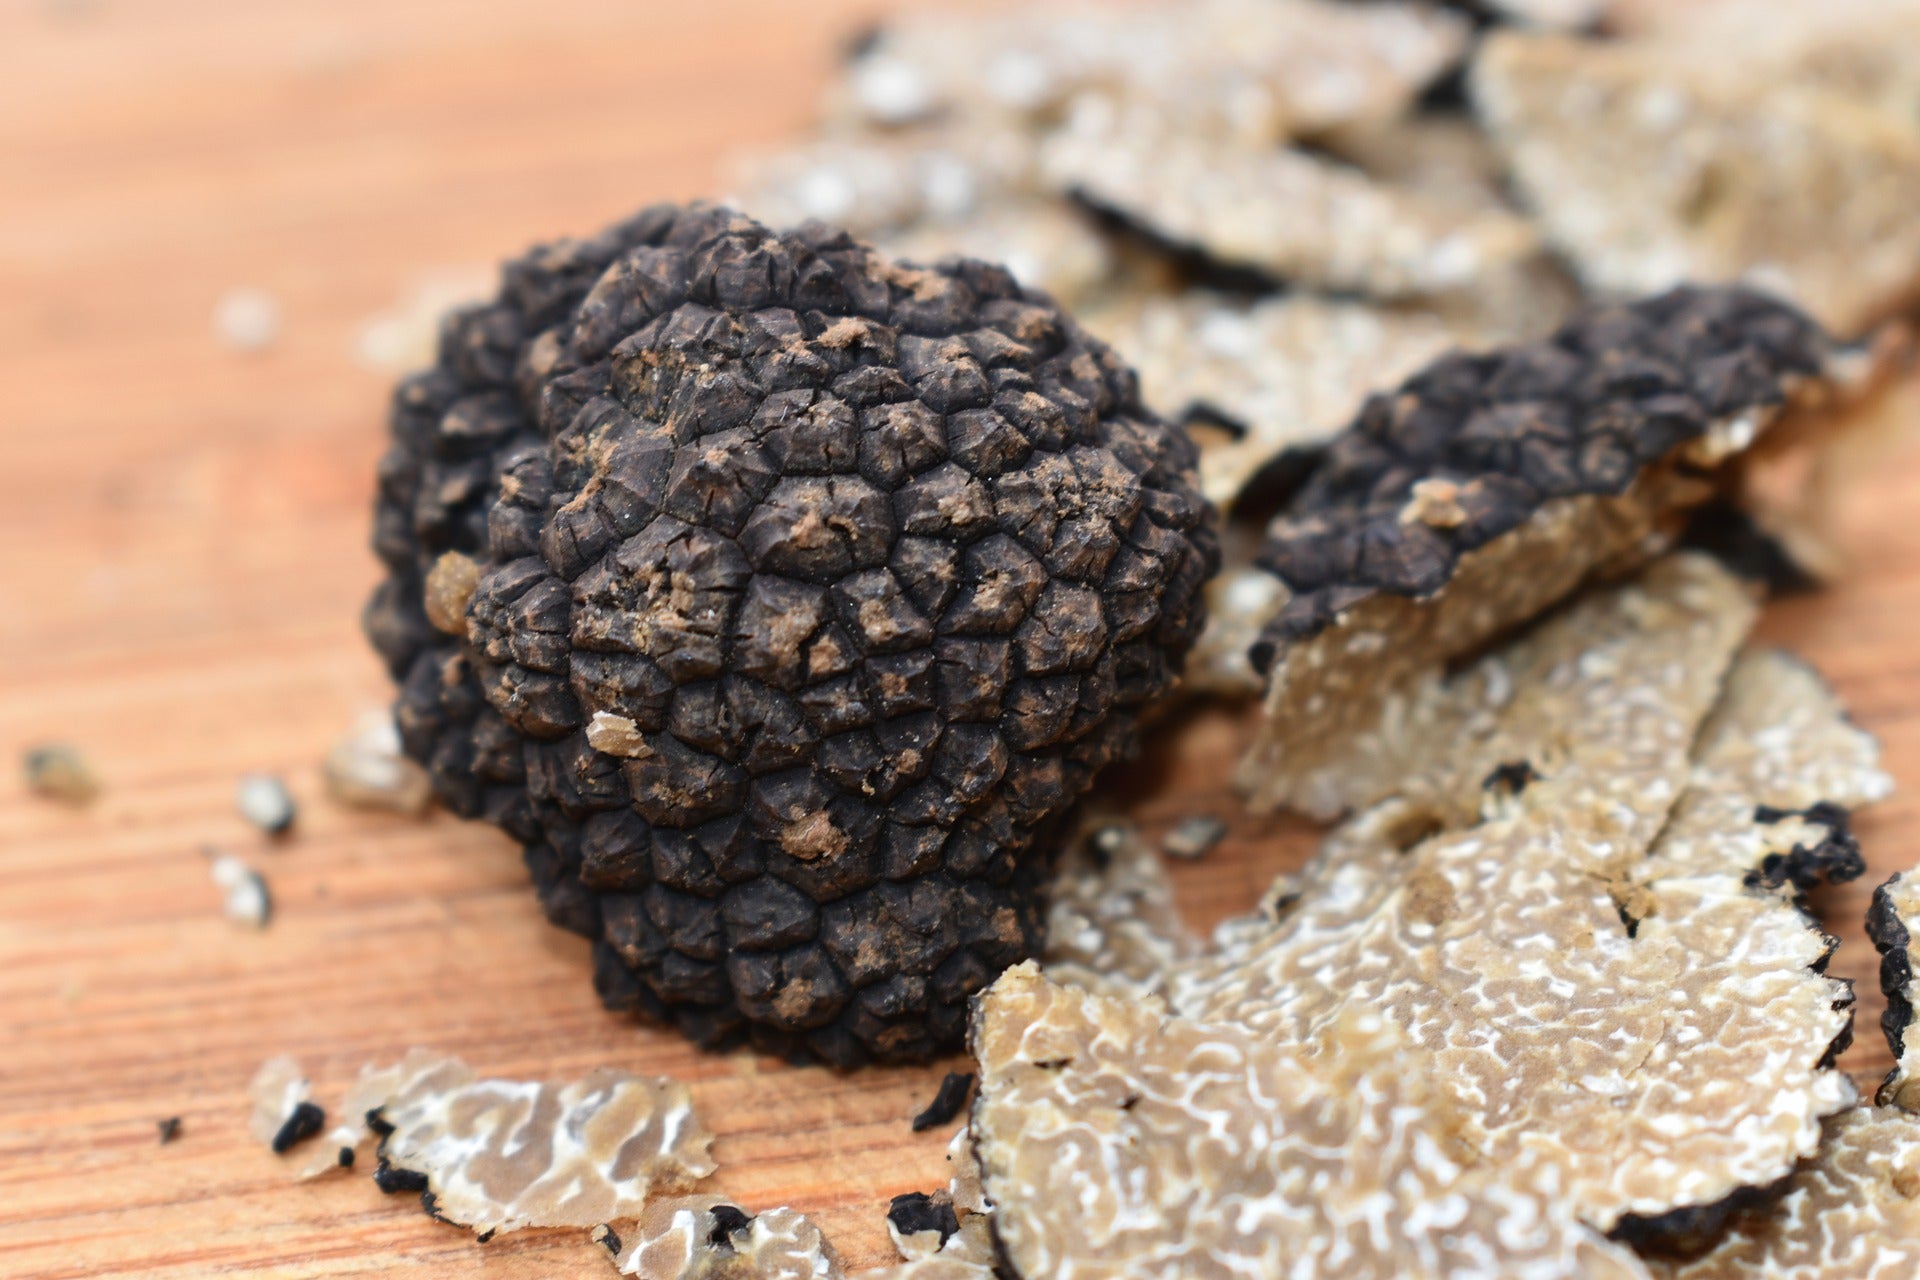 Black truffle on a cutting board with shavings